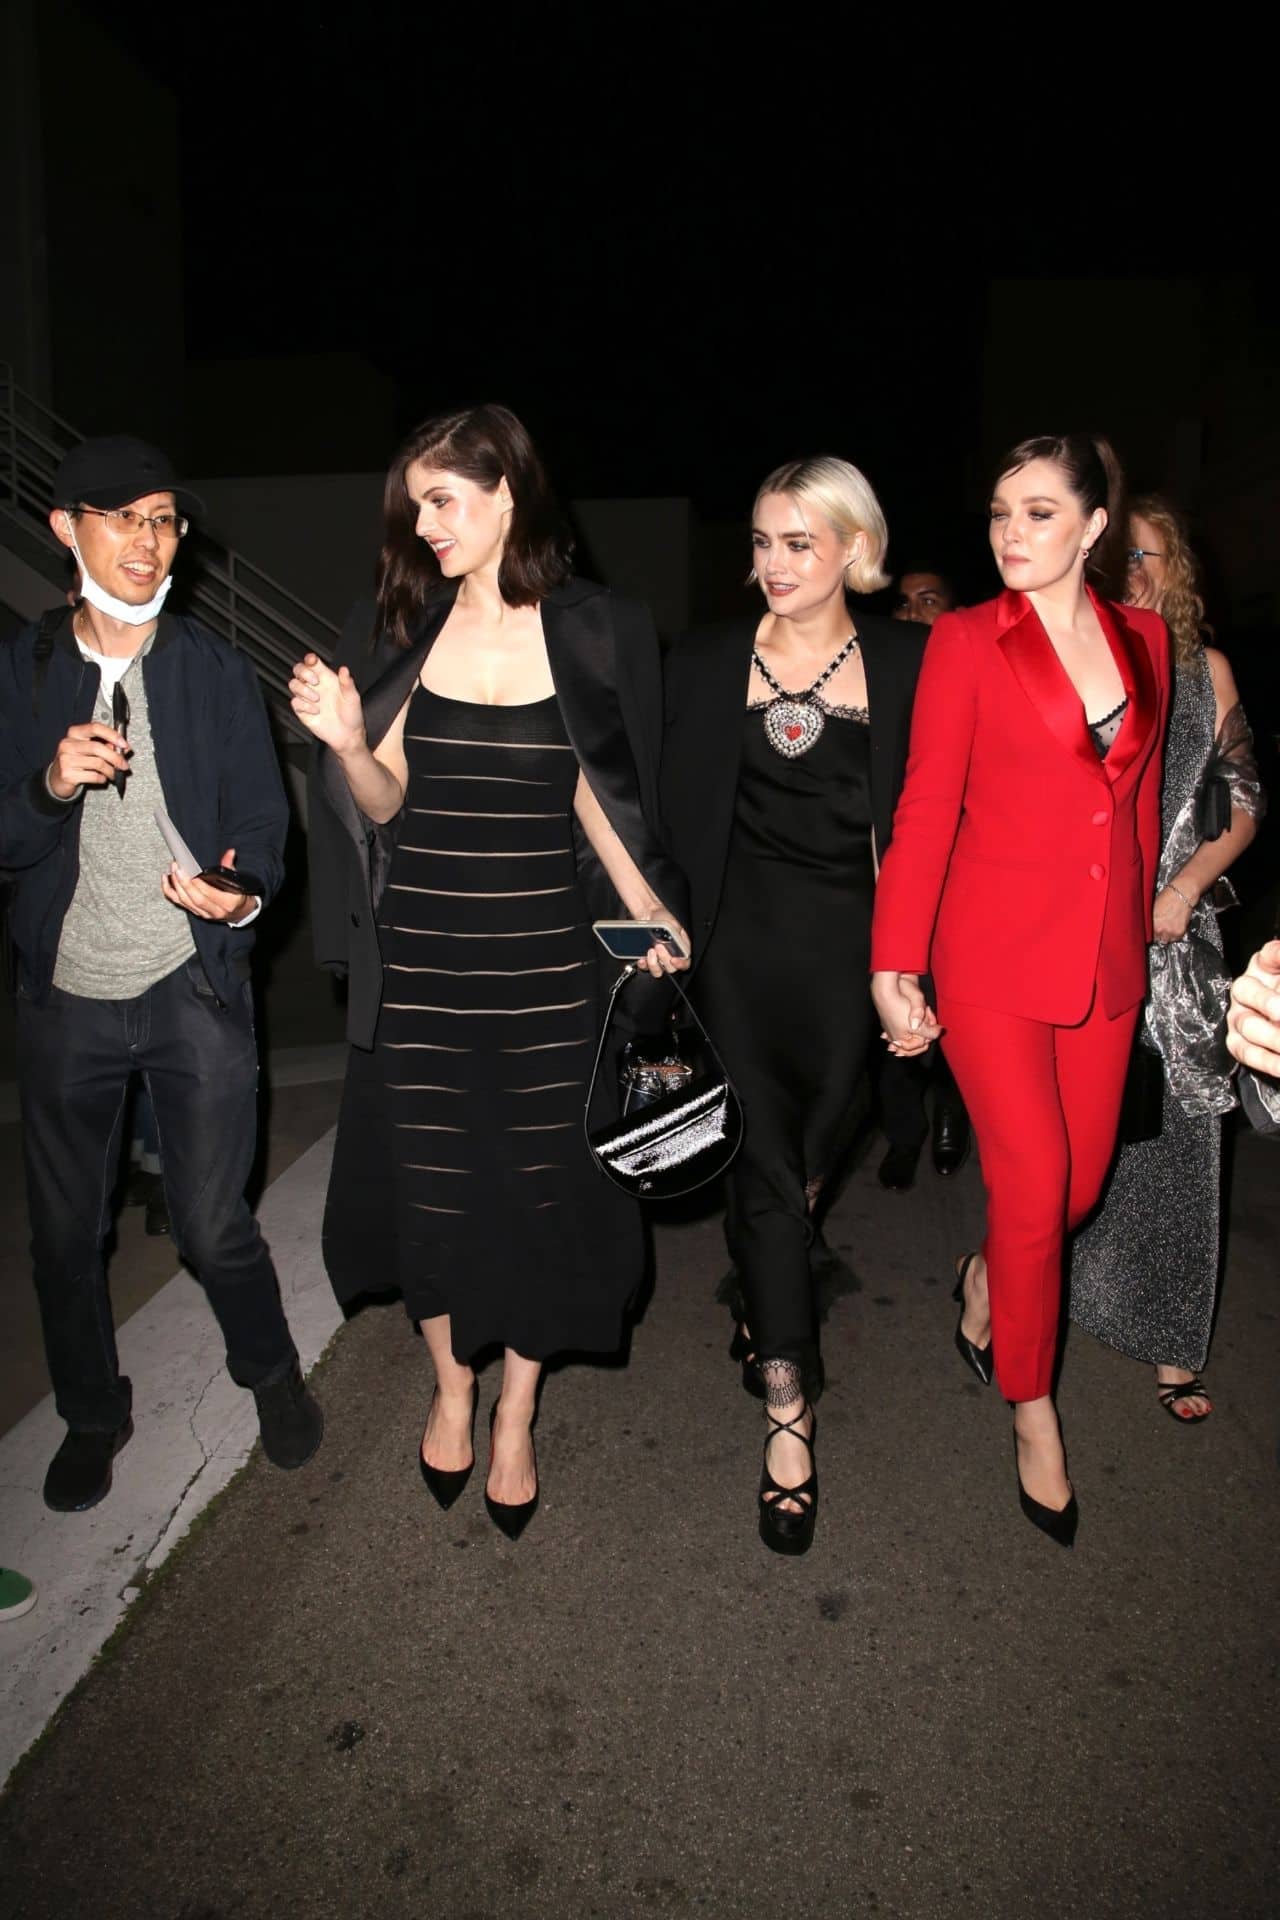 Alexandra Daddario Oozed Beauty in a Chic Dress with Semi-sheer Stripes